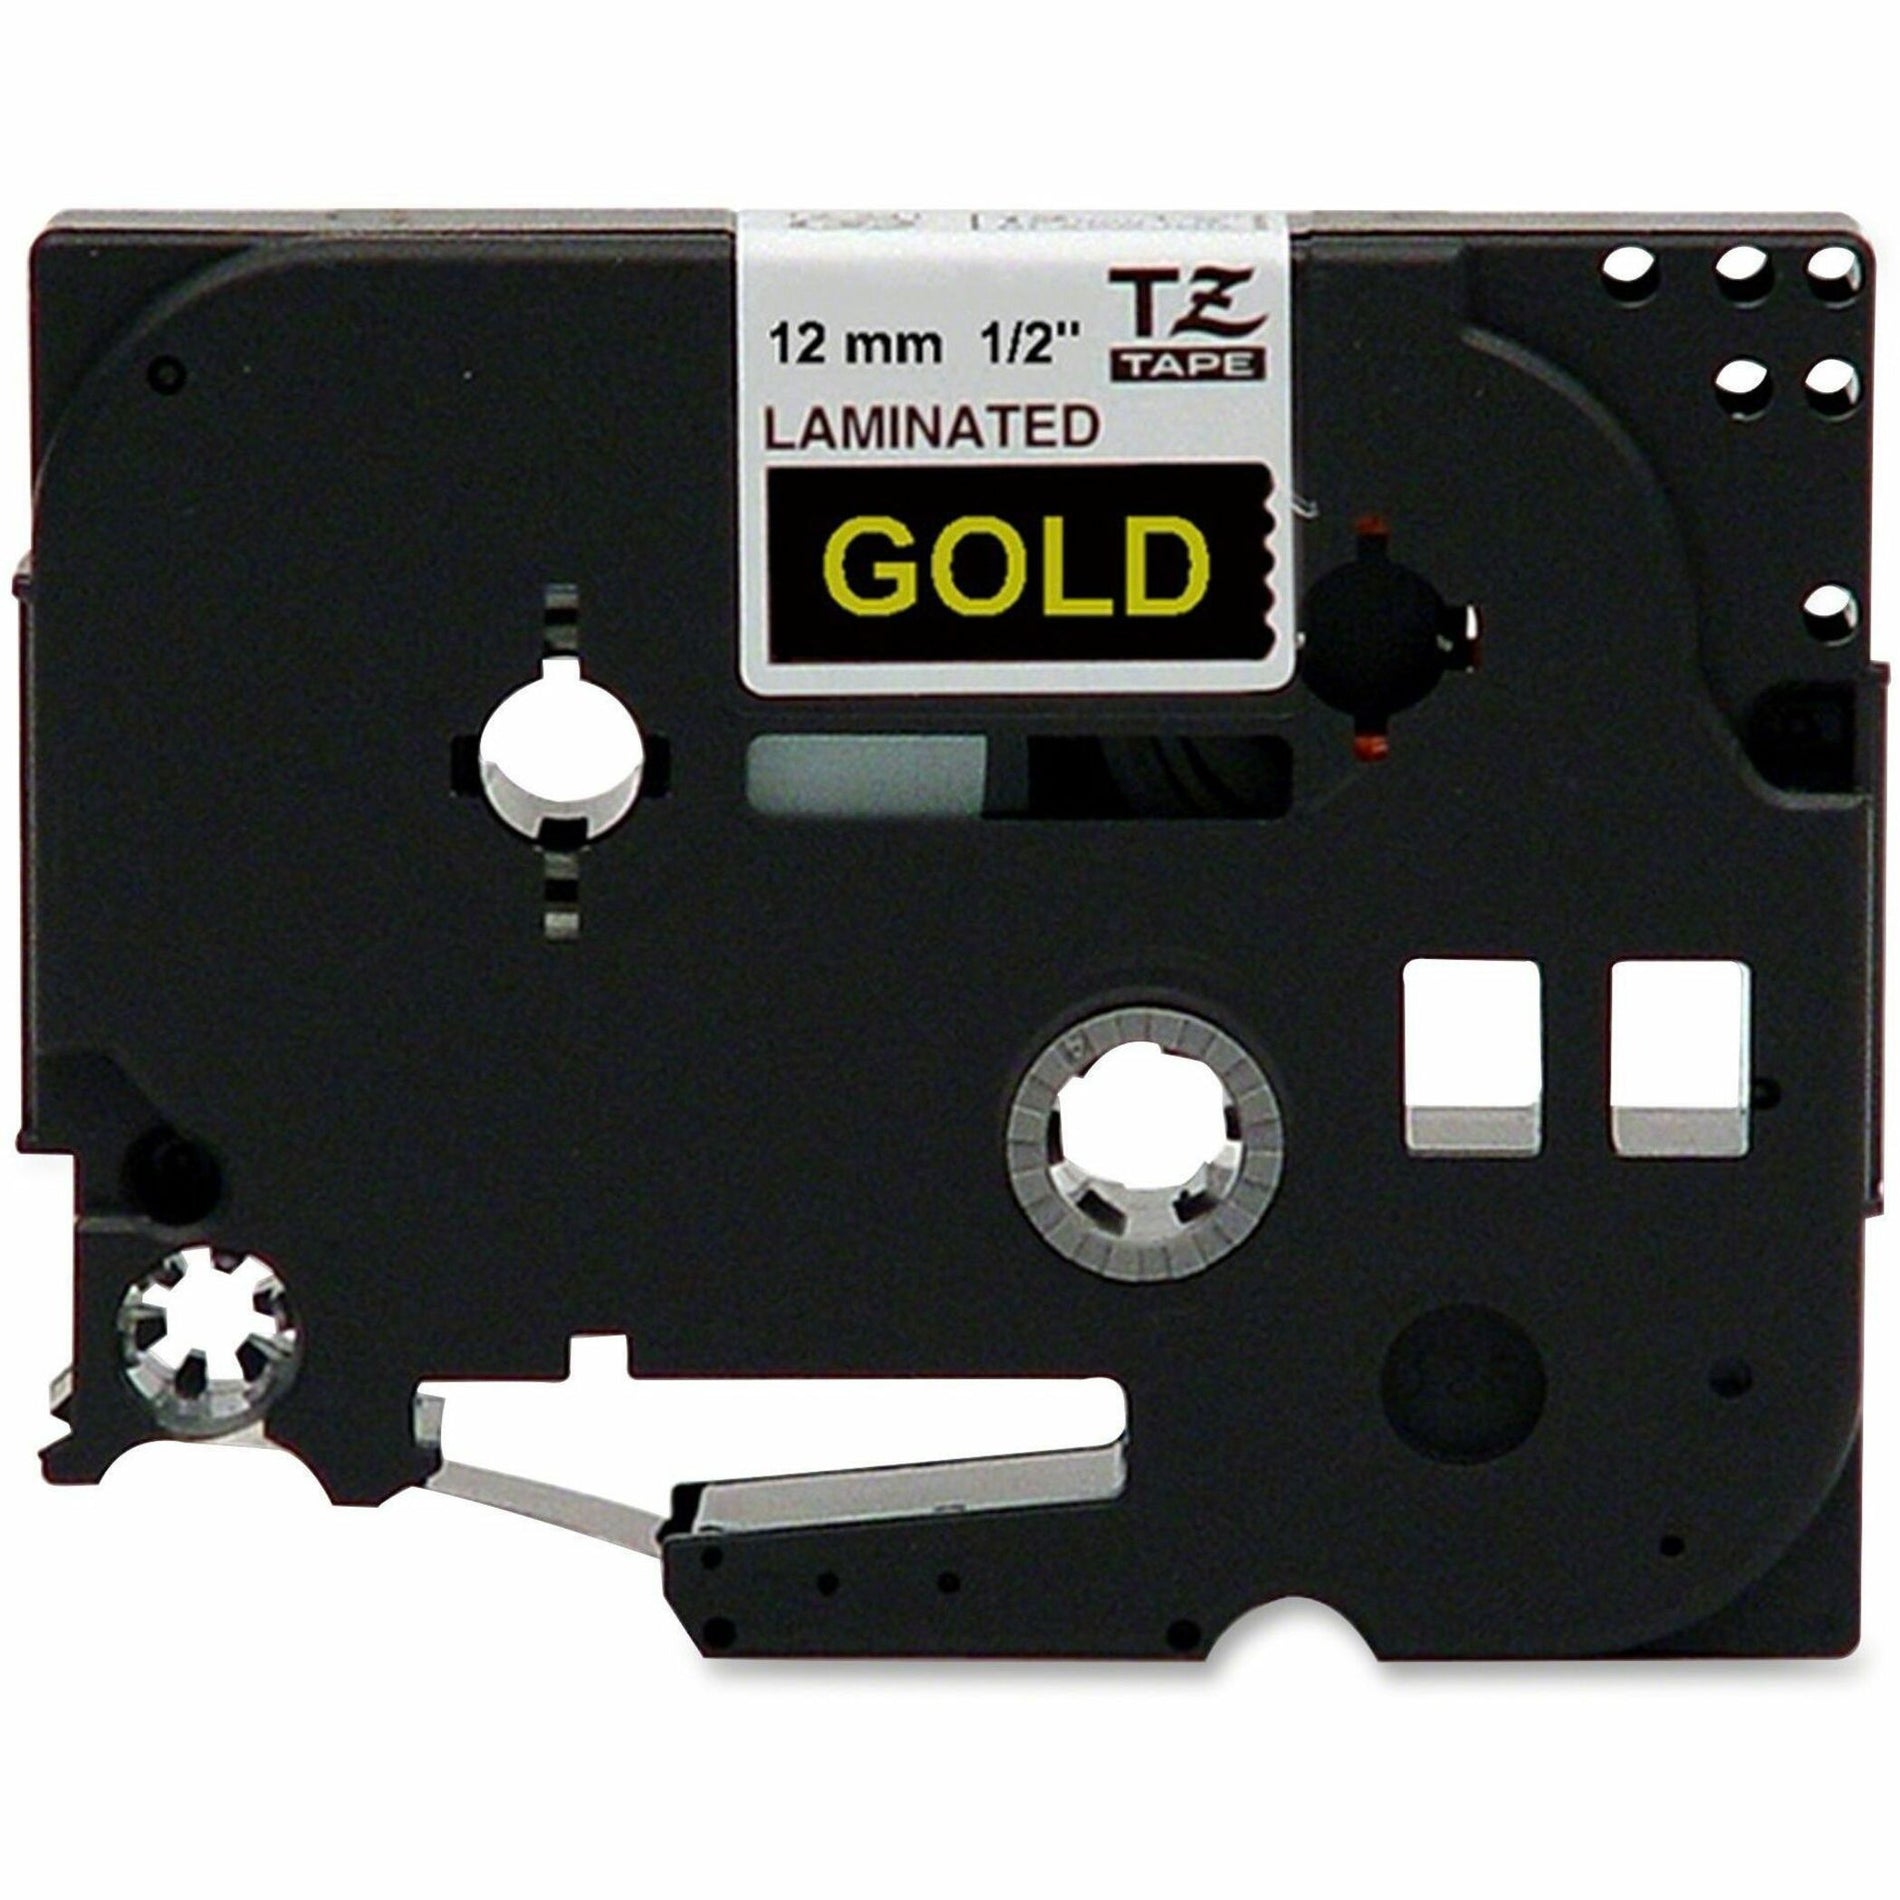 Brother TZE334 P-touch TZe Laminated Tape Cartridges, 1/2" Black, Grease Resistant, Grime Resistant, Temperature Resistant, Water Resistant